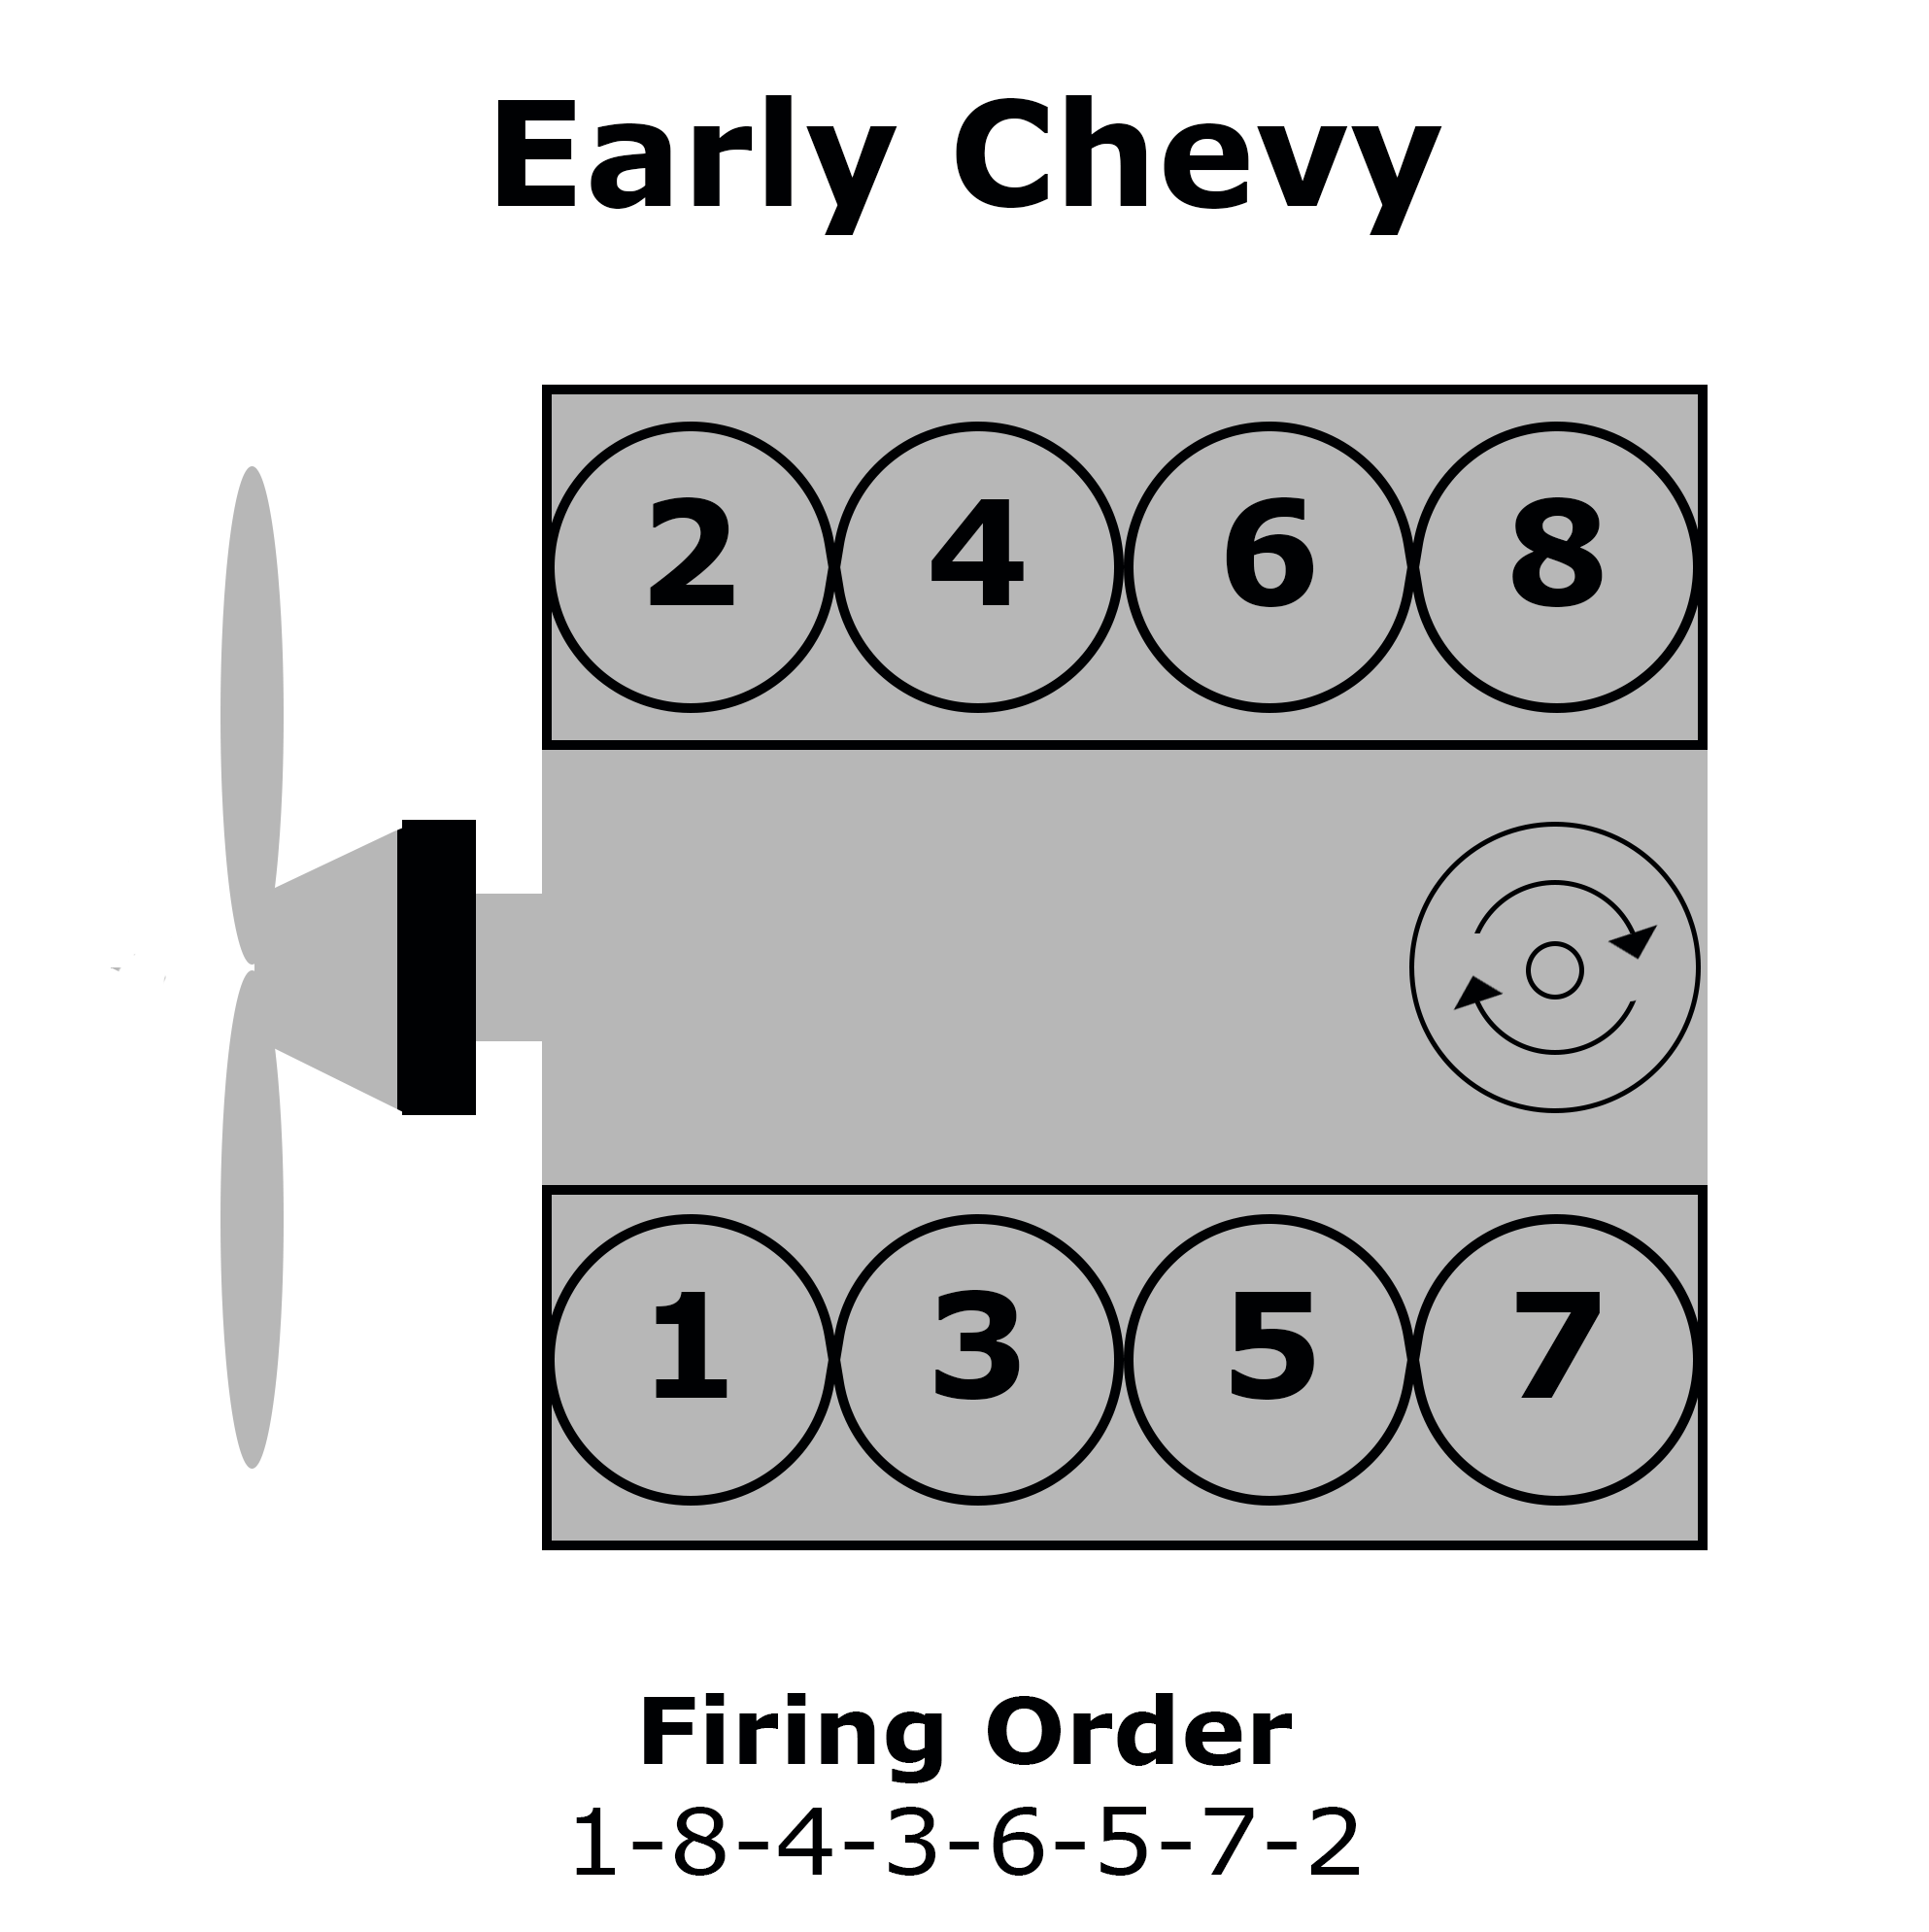 Early Chevy V8 Cylinder Numbering, Distributor Rotation, and Firing Order